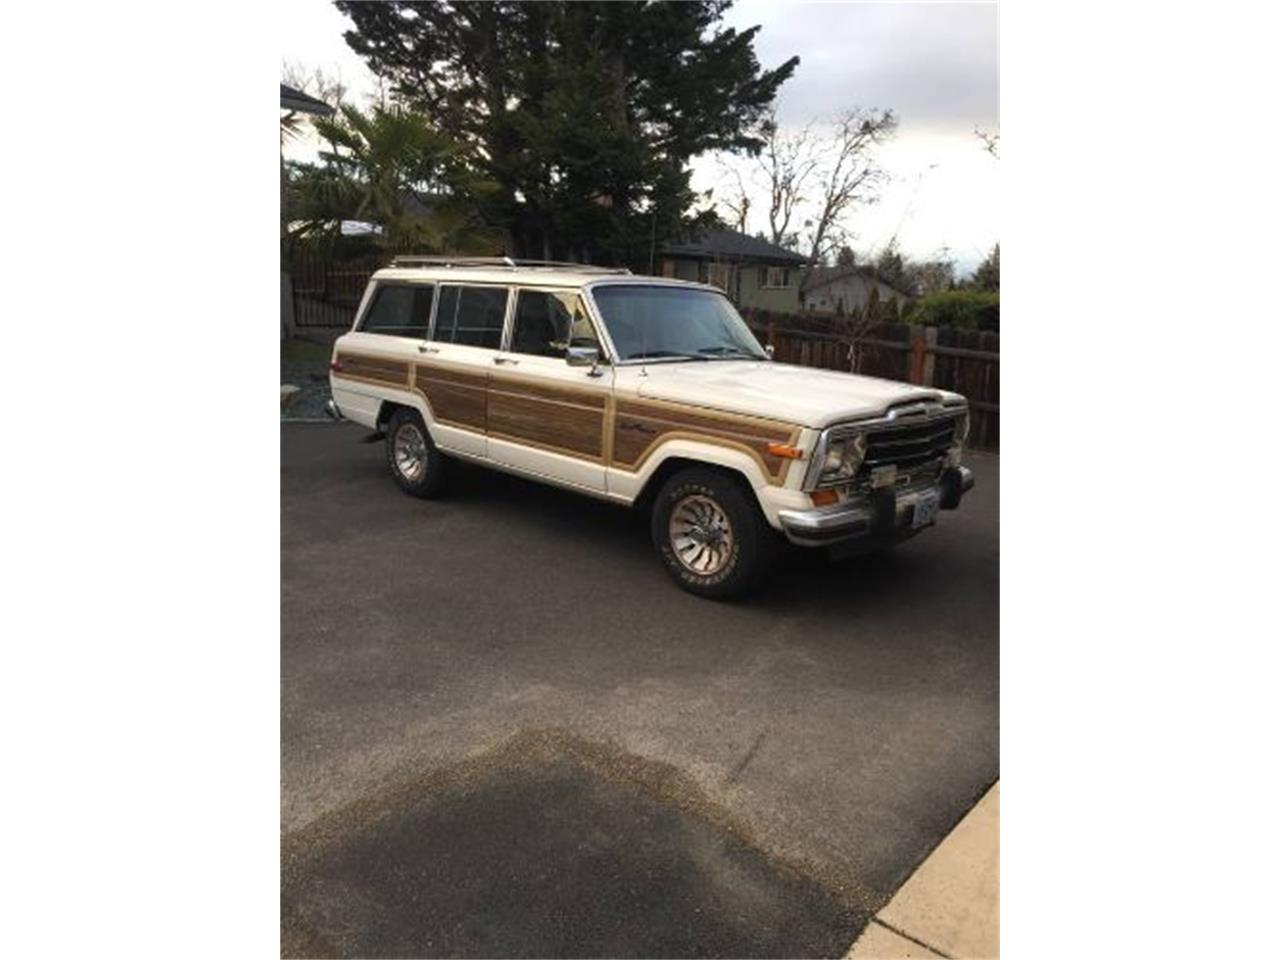 1987 Jeep Grand Wagoneer for sale in Cadillac, MI